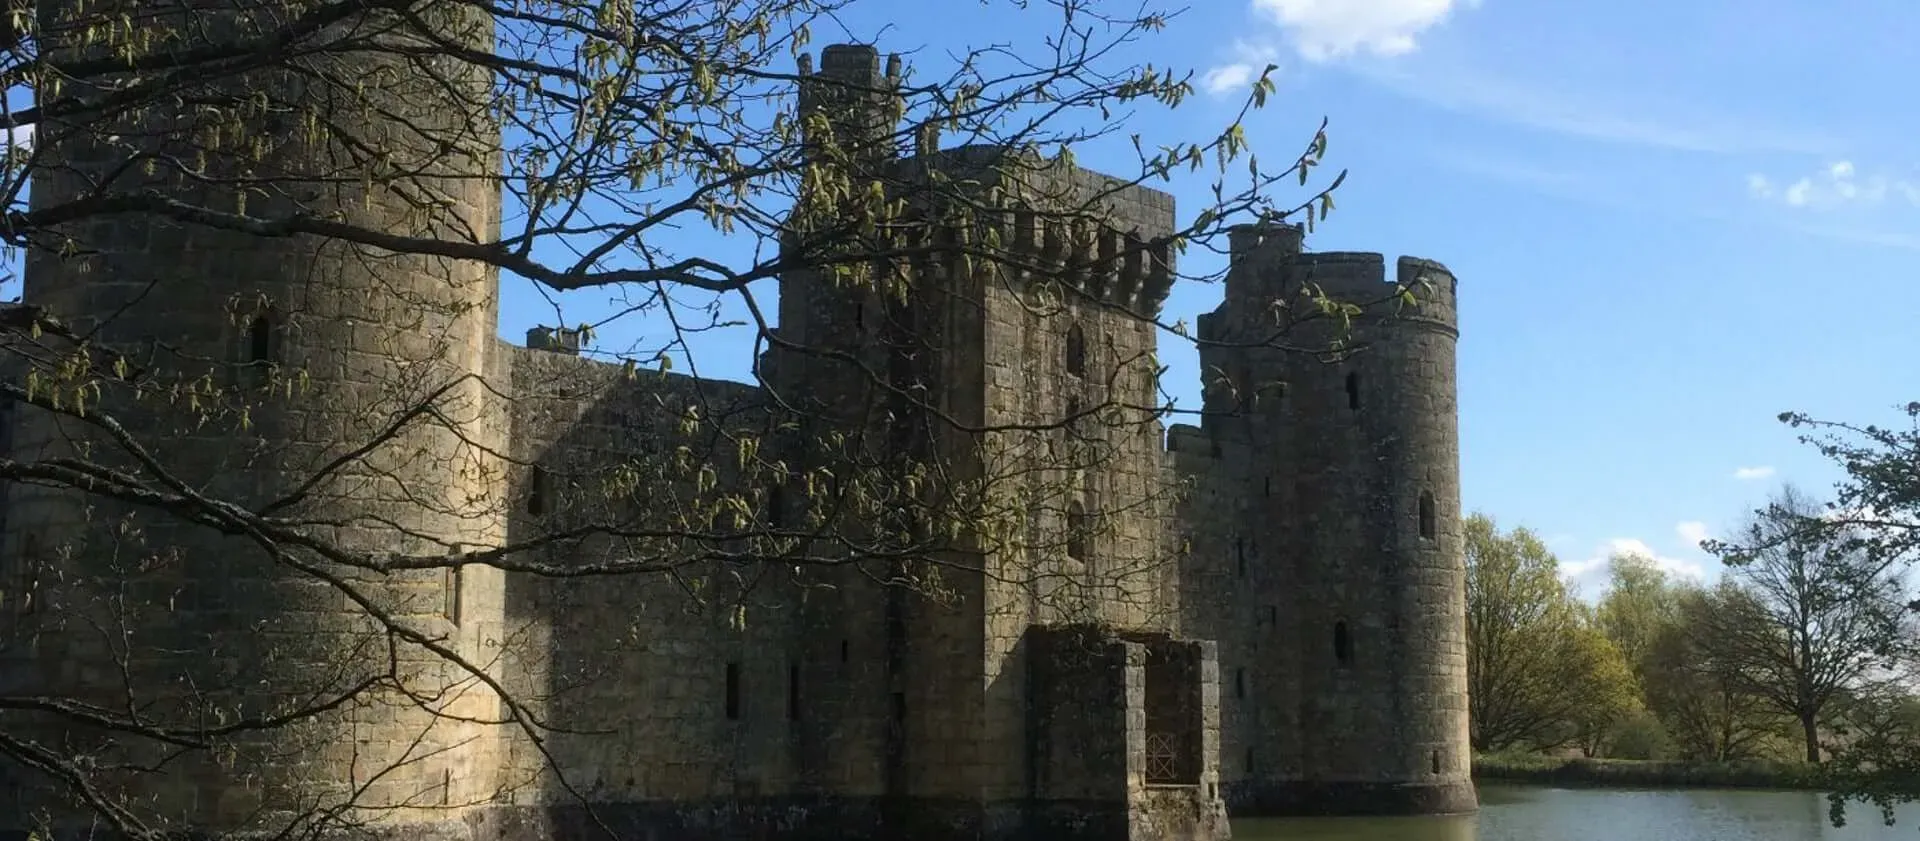 The exterior of Bodiam Castle is one of the best examples of a quadrangle castle.